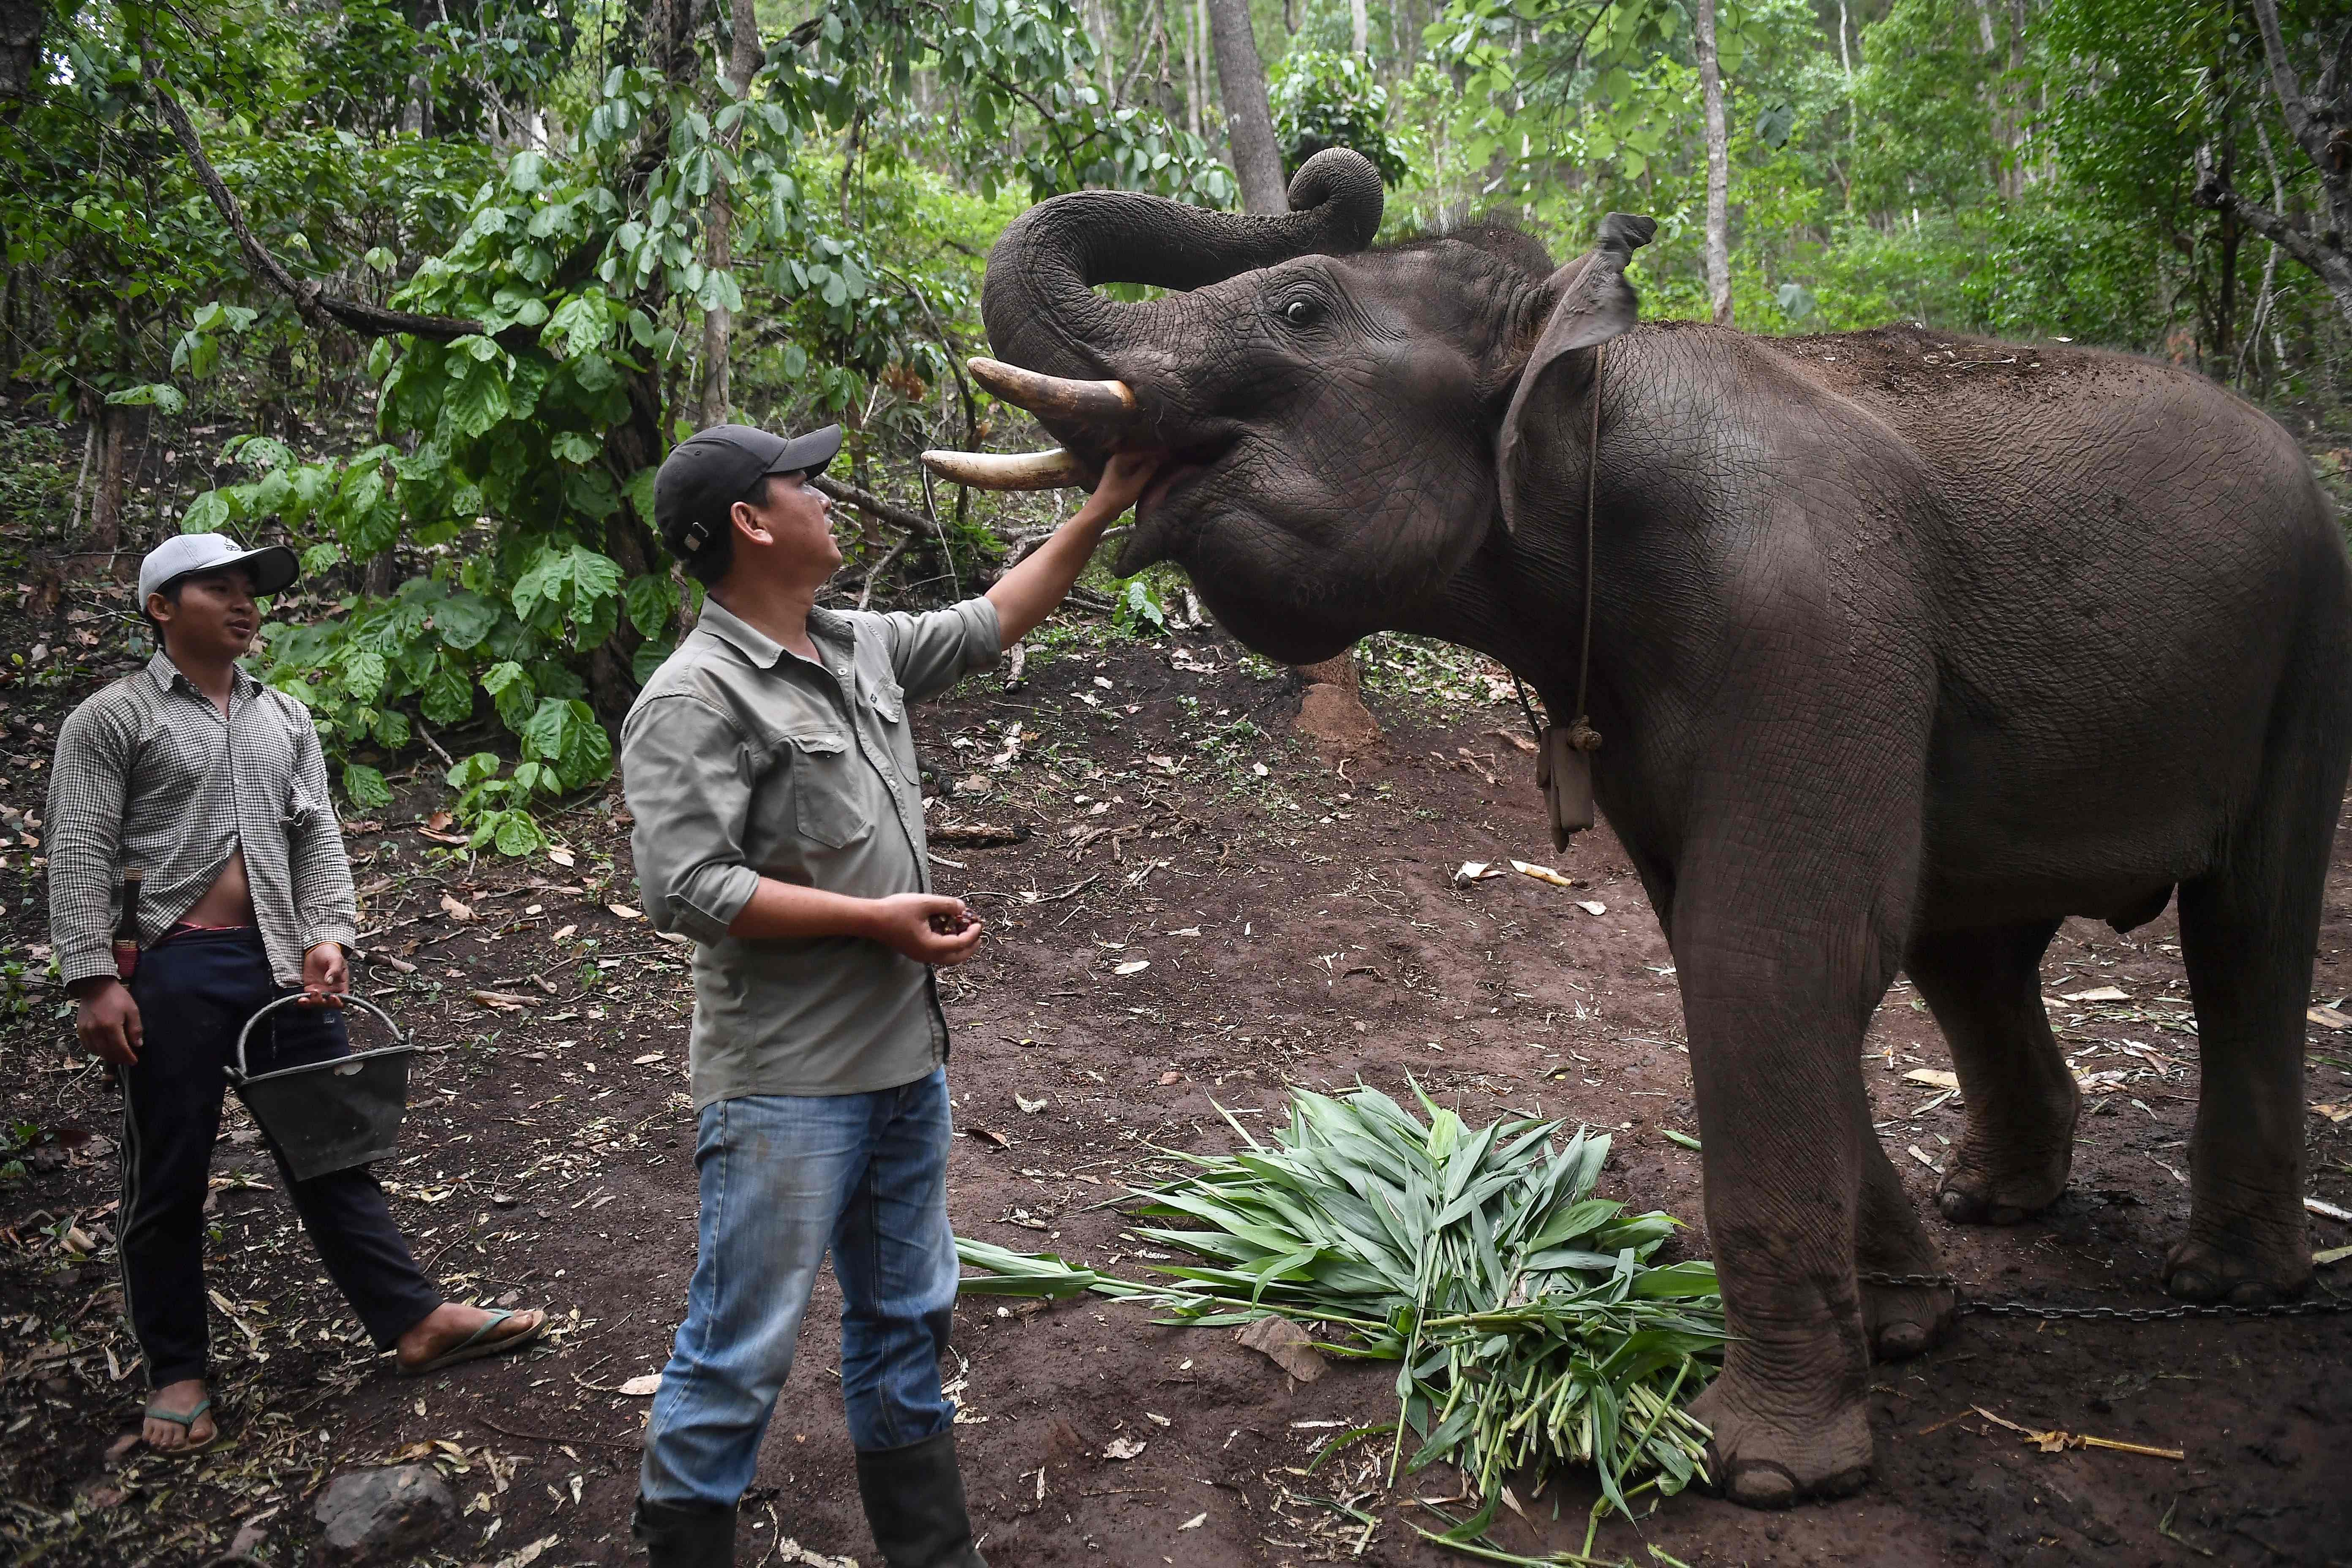 This photo taken on June 3, 2020 shows Thai Elephant Alliance director Theerapat Trungprakan giving a treat to an elephant who is temporarily chained as other elephants undergo treatment for health issues, in Mae Chaem district in the northern Thai province of Chiang Mai, where hundreds of elephants returned from various tourist camps since the outbreak of the COVID-19 coronavirus. - As the coronavirus pandemic paralysed global travel, Thailand's some 3,000 domesticated elephants working in amusement parks or "sanctuaries" have been unemployed since the closure of camps in mid-March. With their incomes vanished and risk of starvation growing, more than 1,000 elephants and their mahouts have returned to their villages in the past two months. (Photo by AFP)